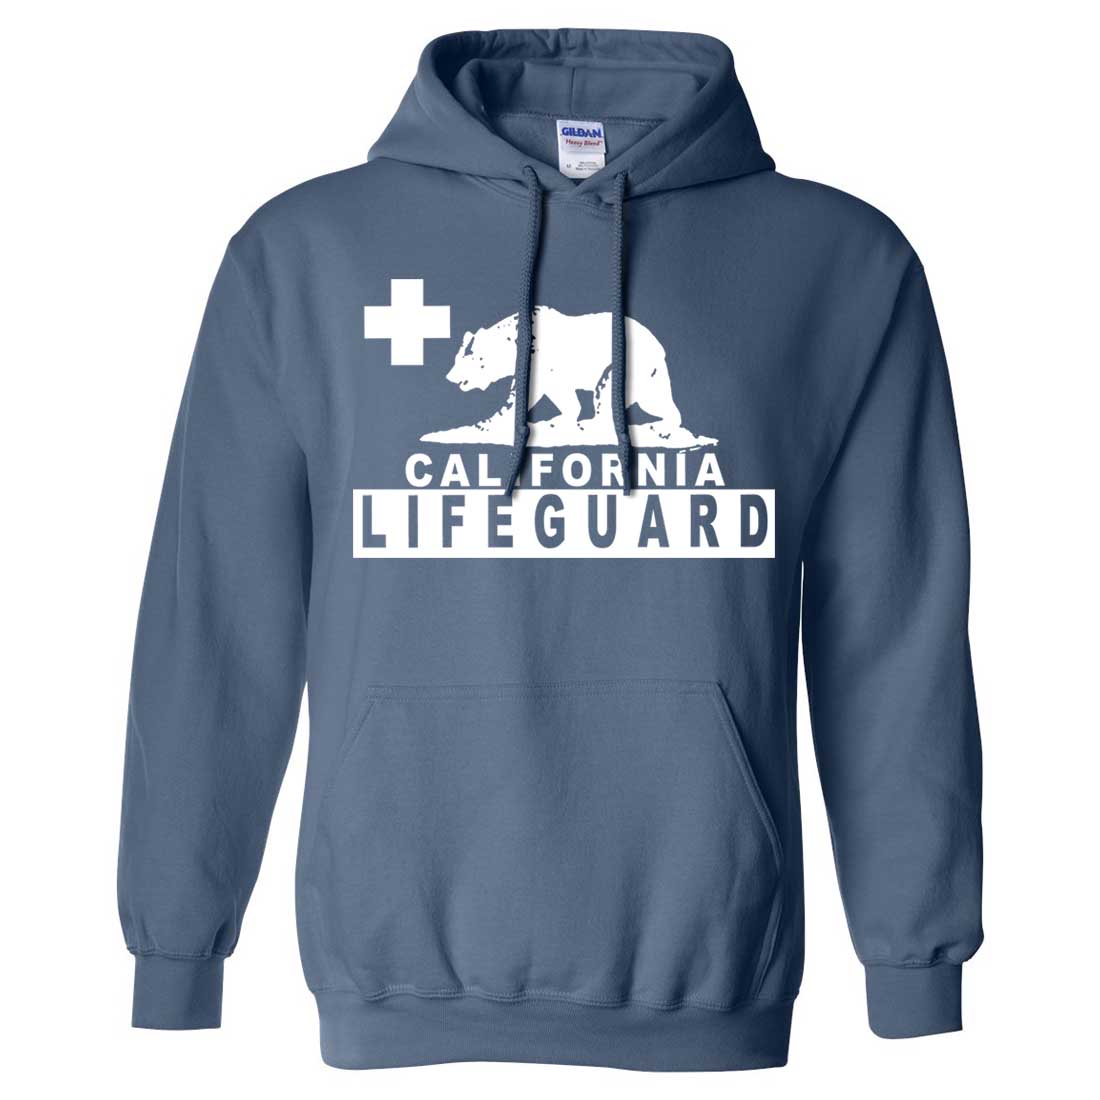 Lifeguard'' Hoodie - Red – All Tides